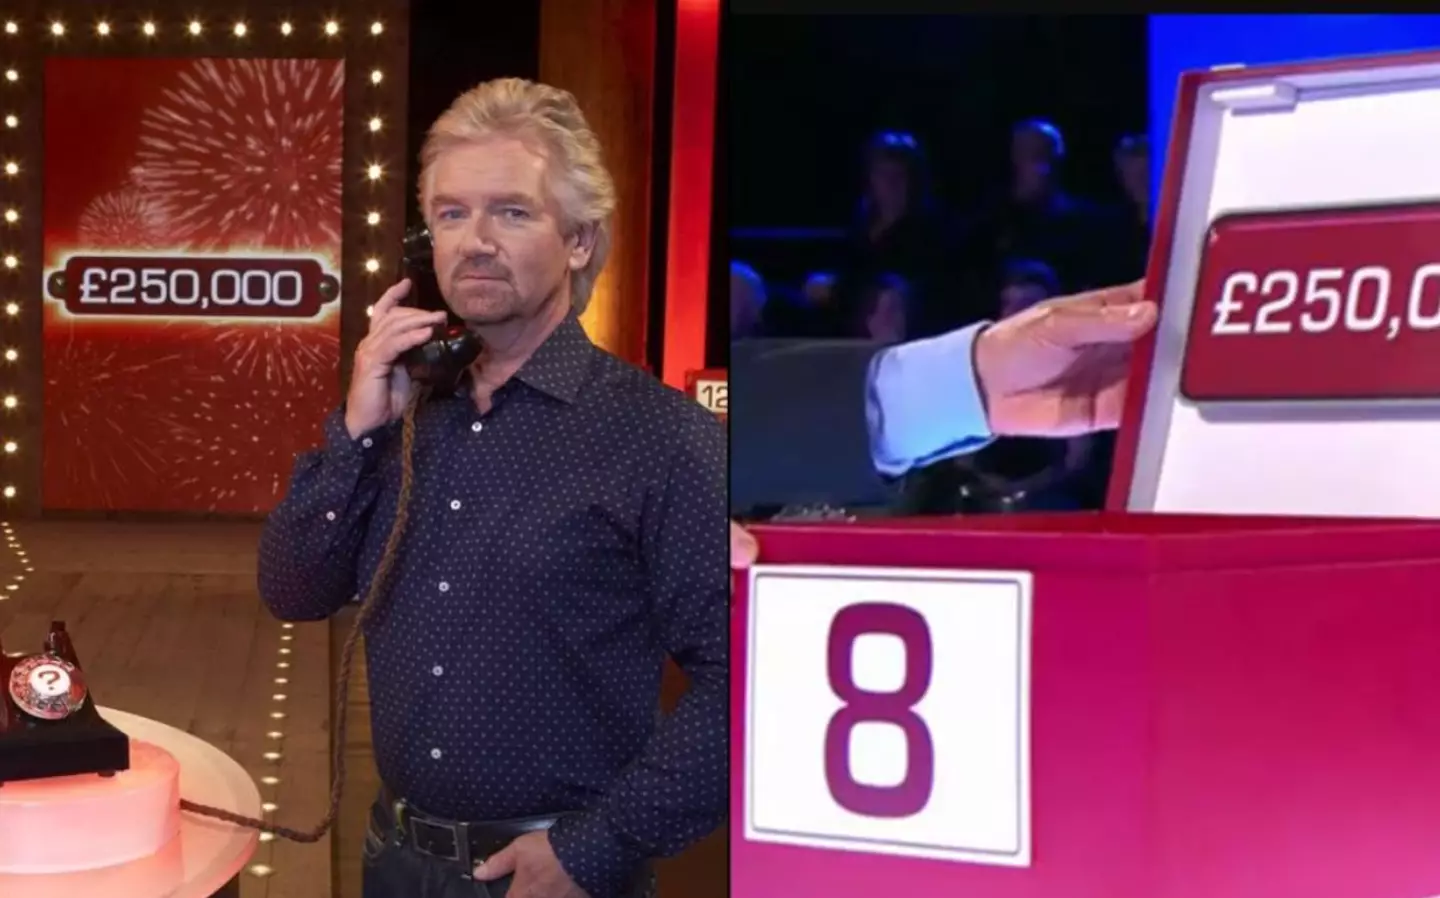 Noel Edmonds is best known for being the host of Deal or No Deal.